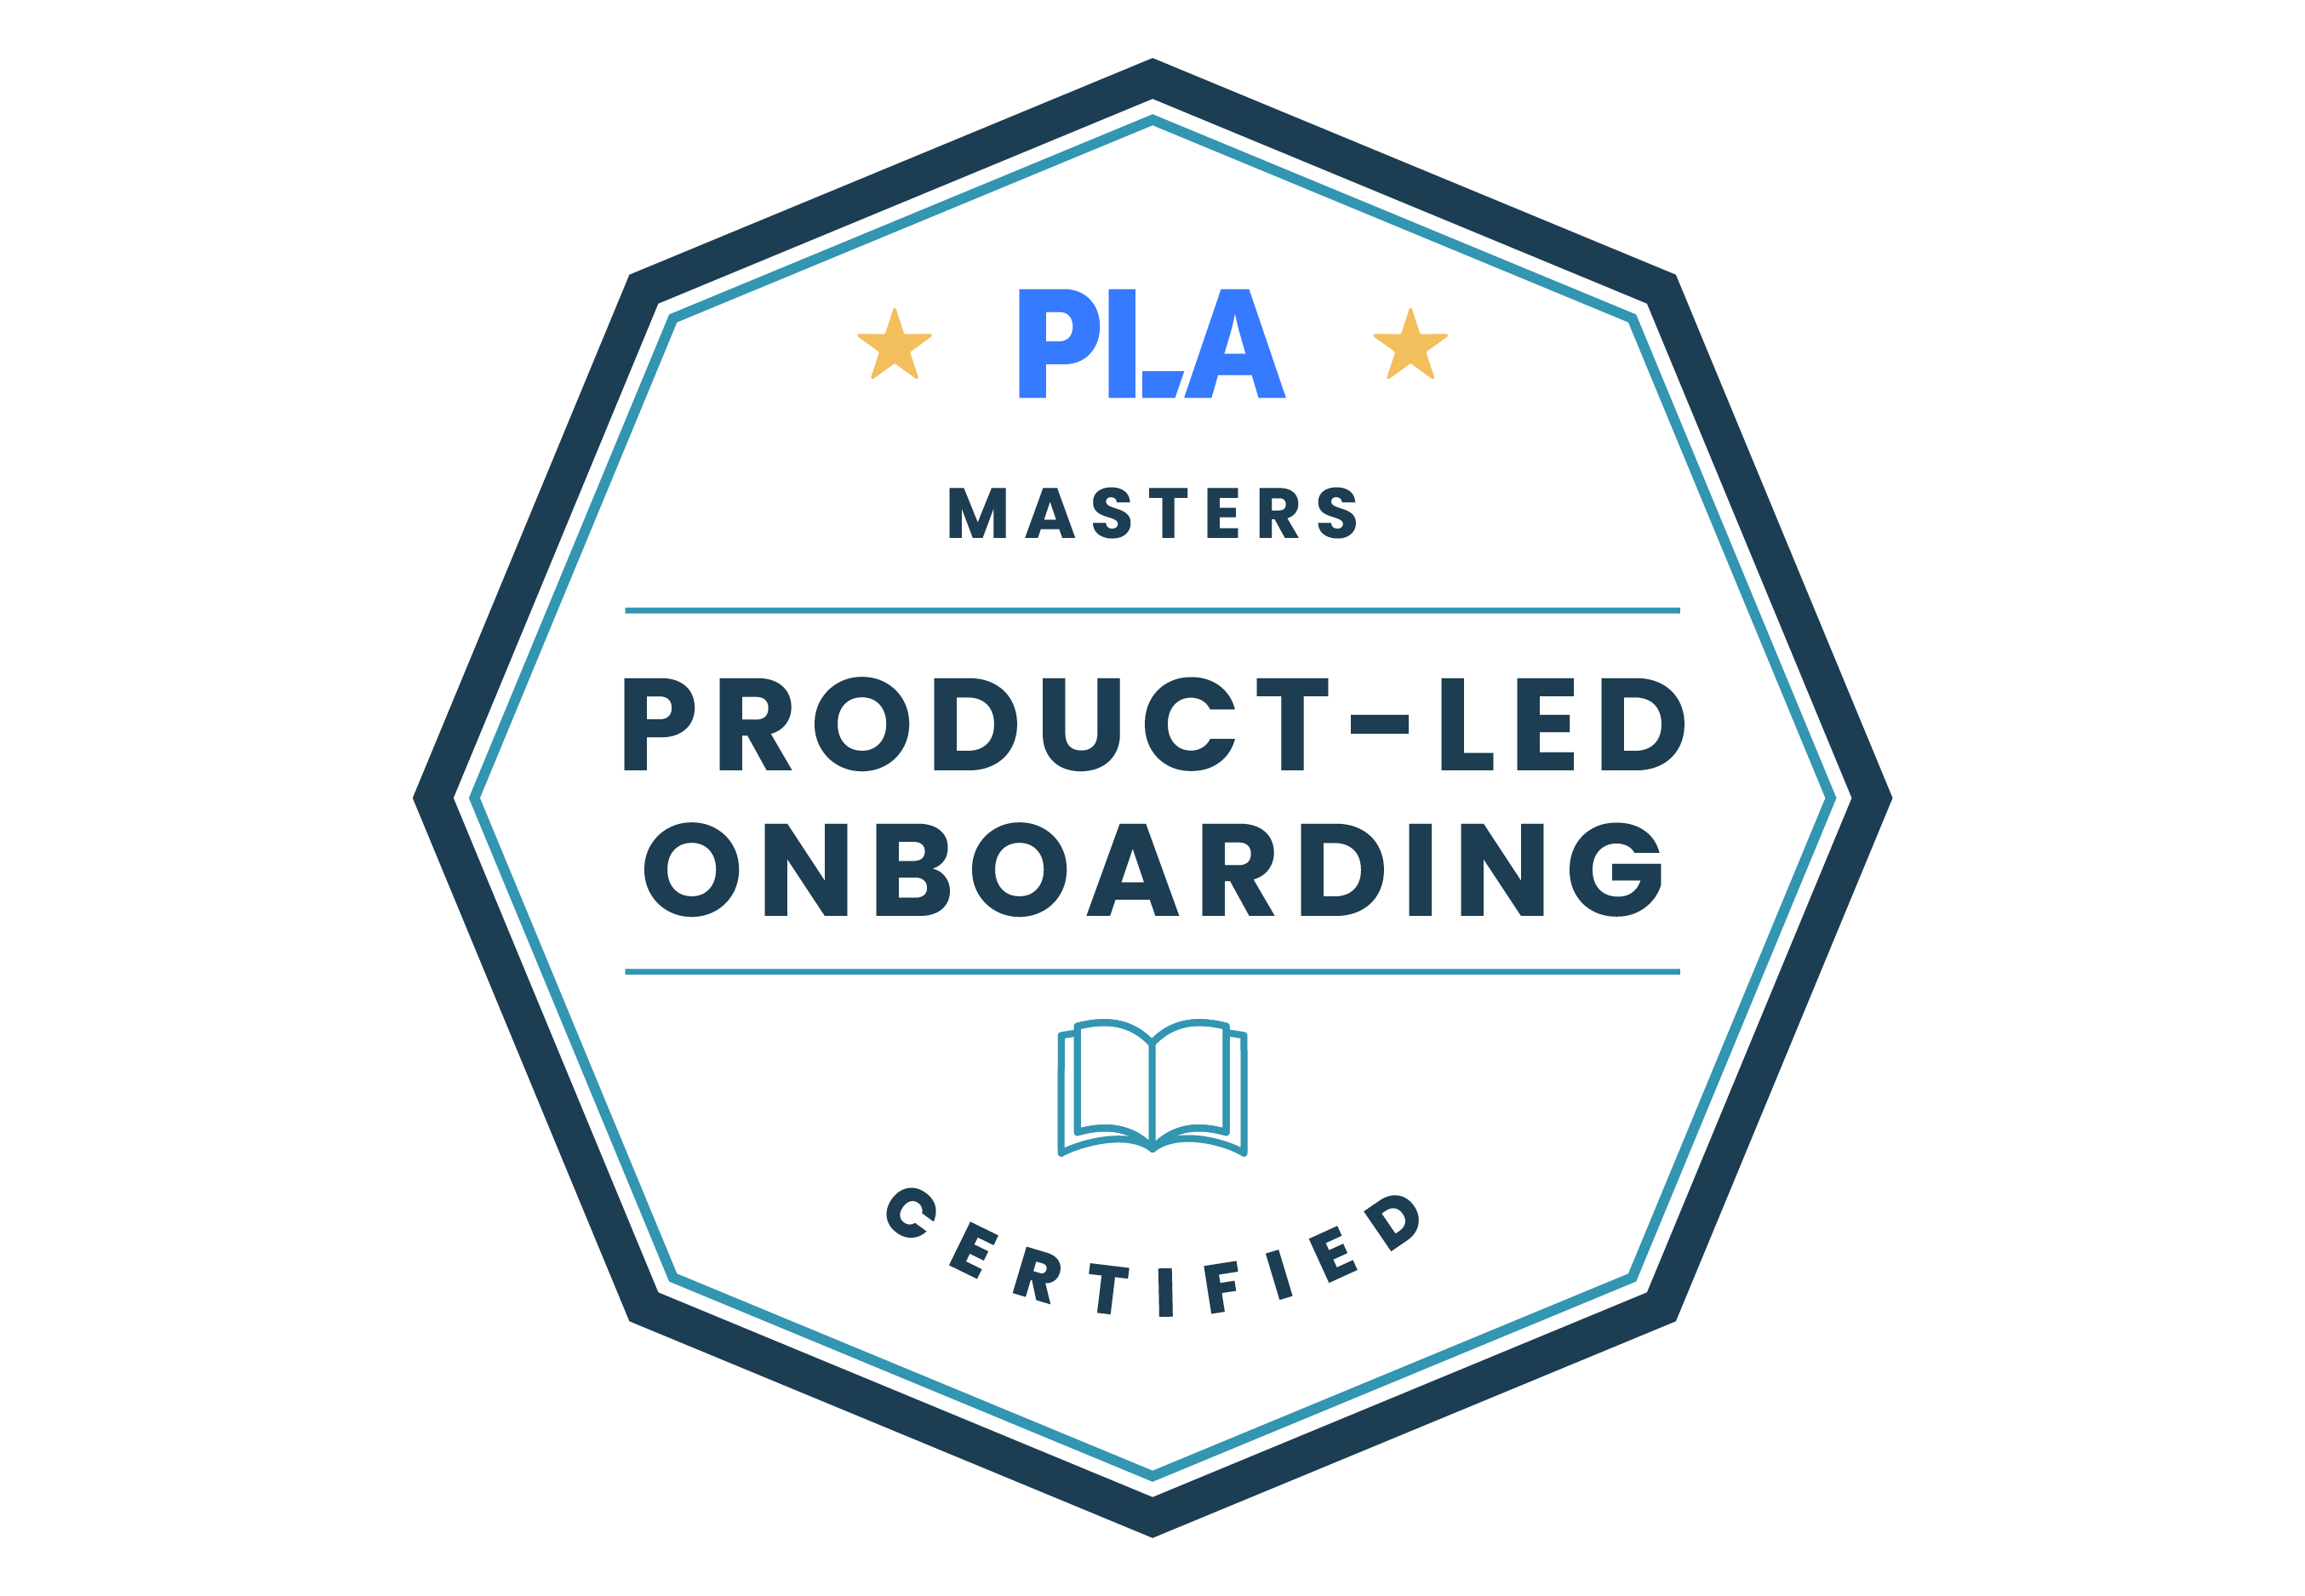 Product-Led Onboarding Certified | Masters badge